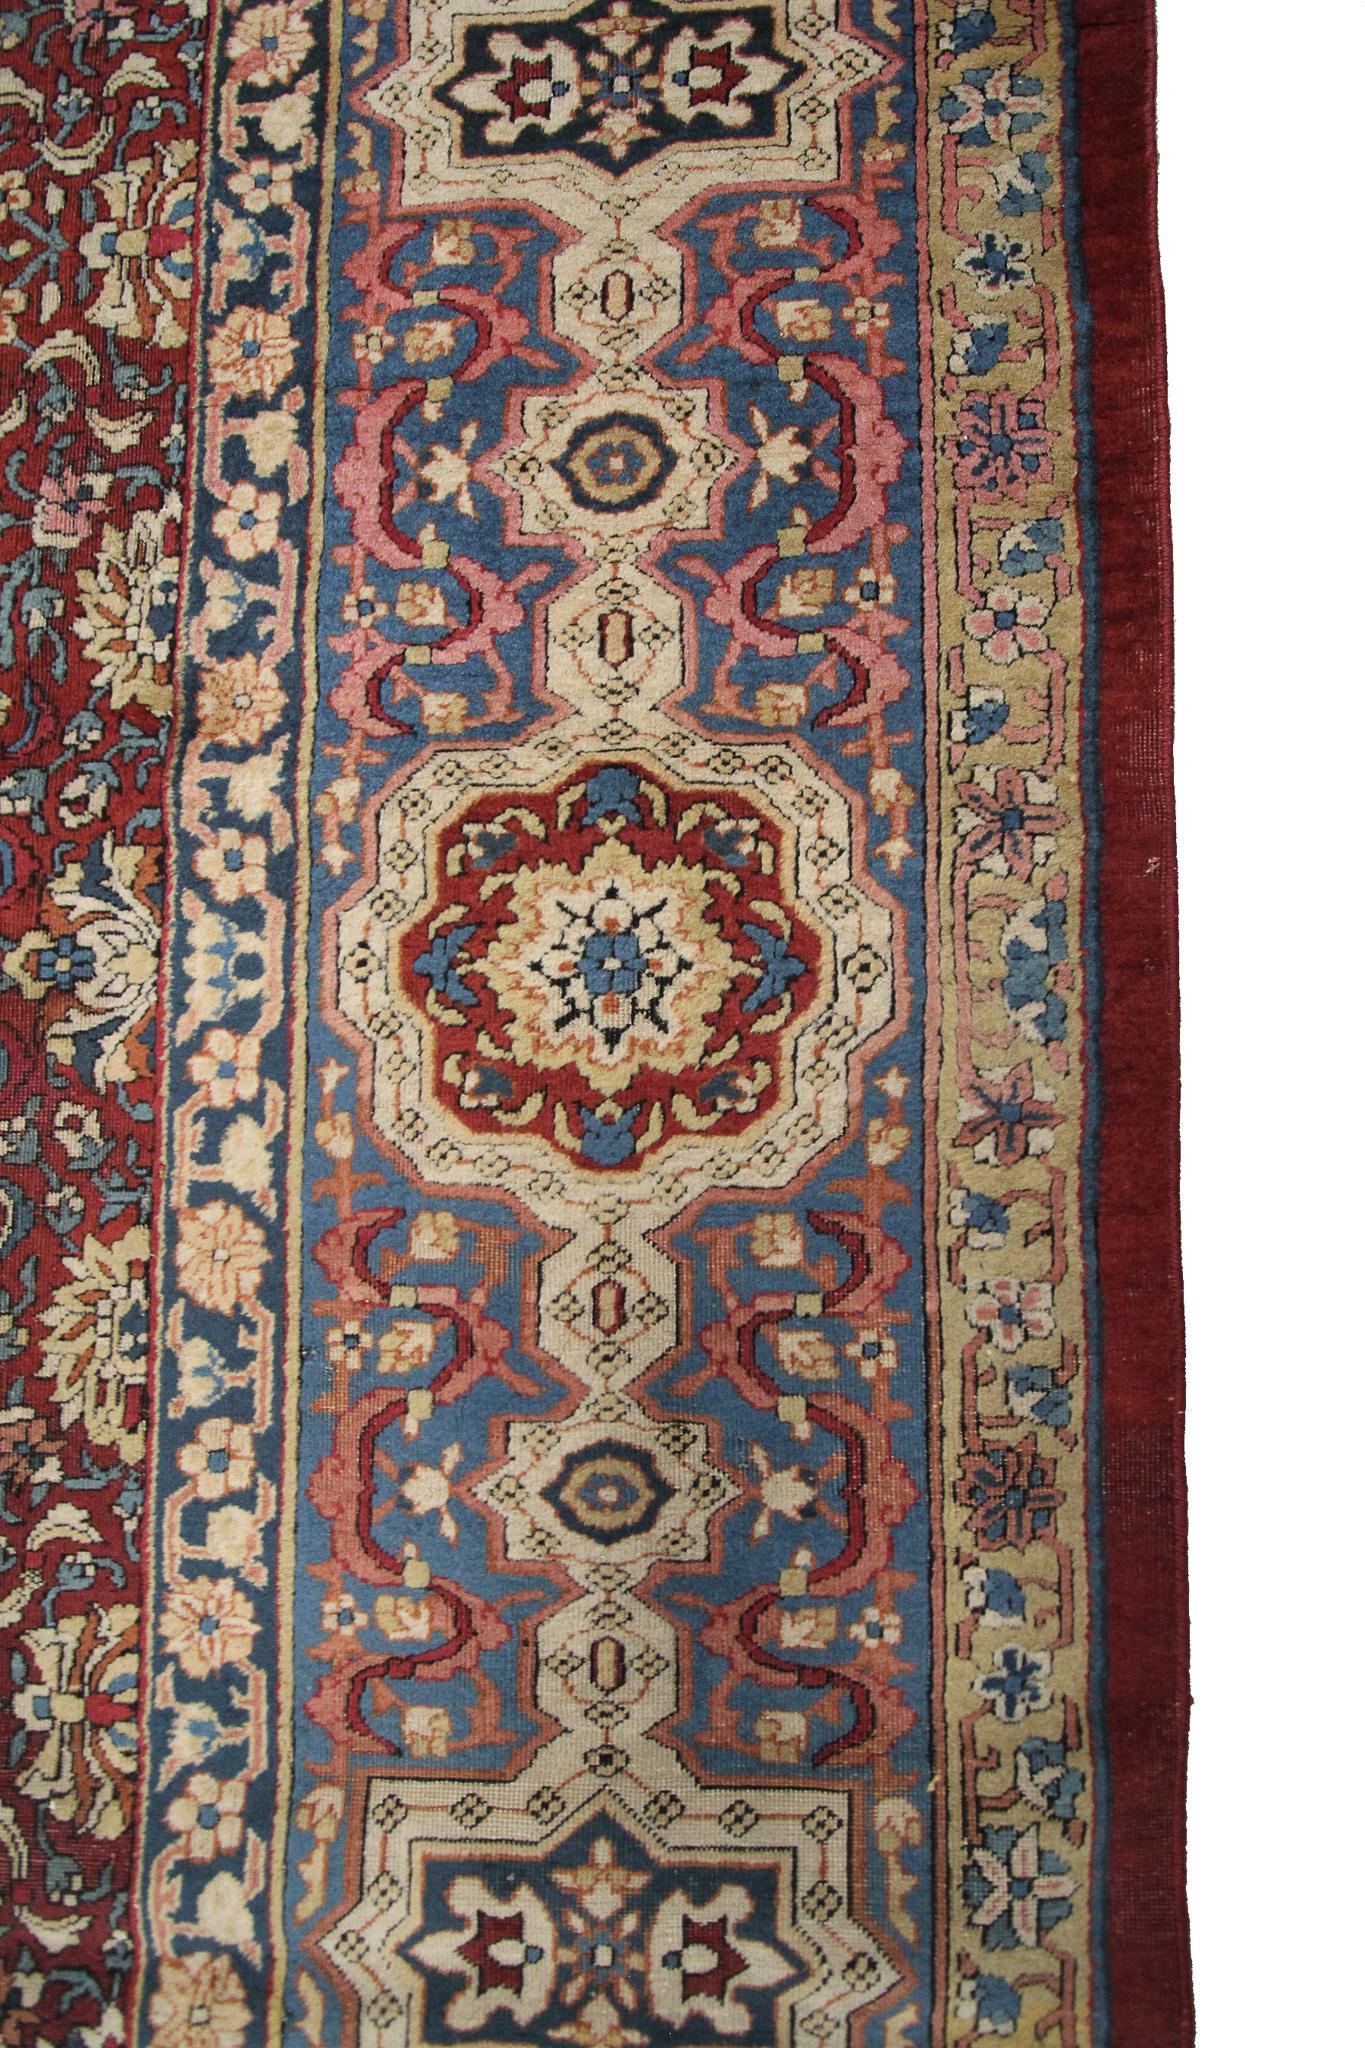 Hand-Knotted Mid-1800 Antique Mogul Rug Geometric 10x20 Oversized Antique Rug 298x597cm For Sale